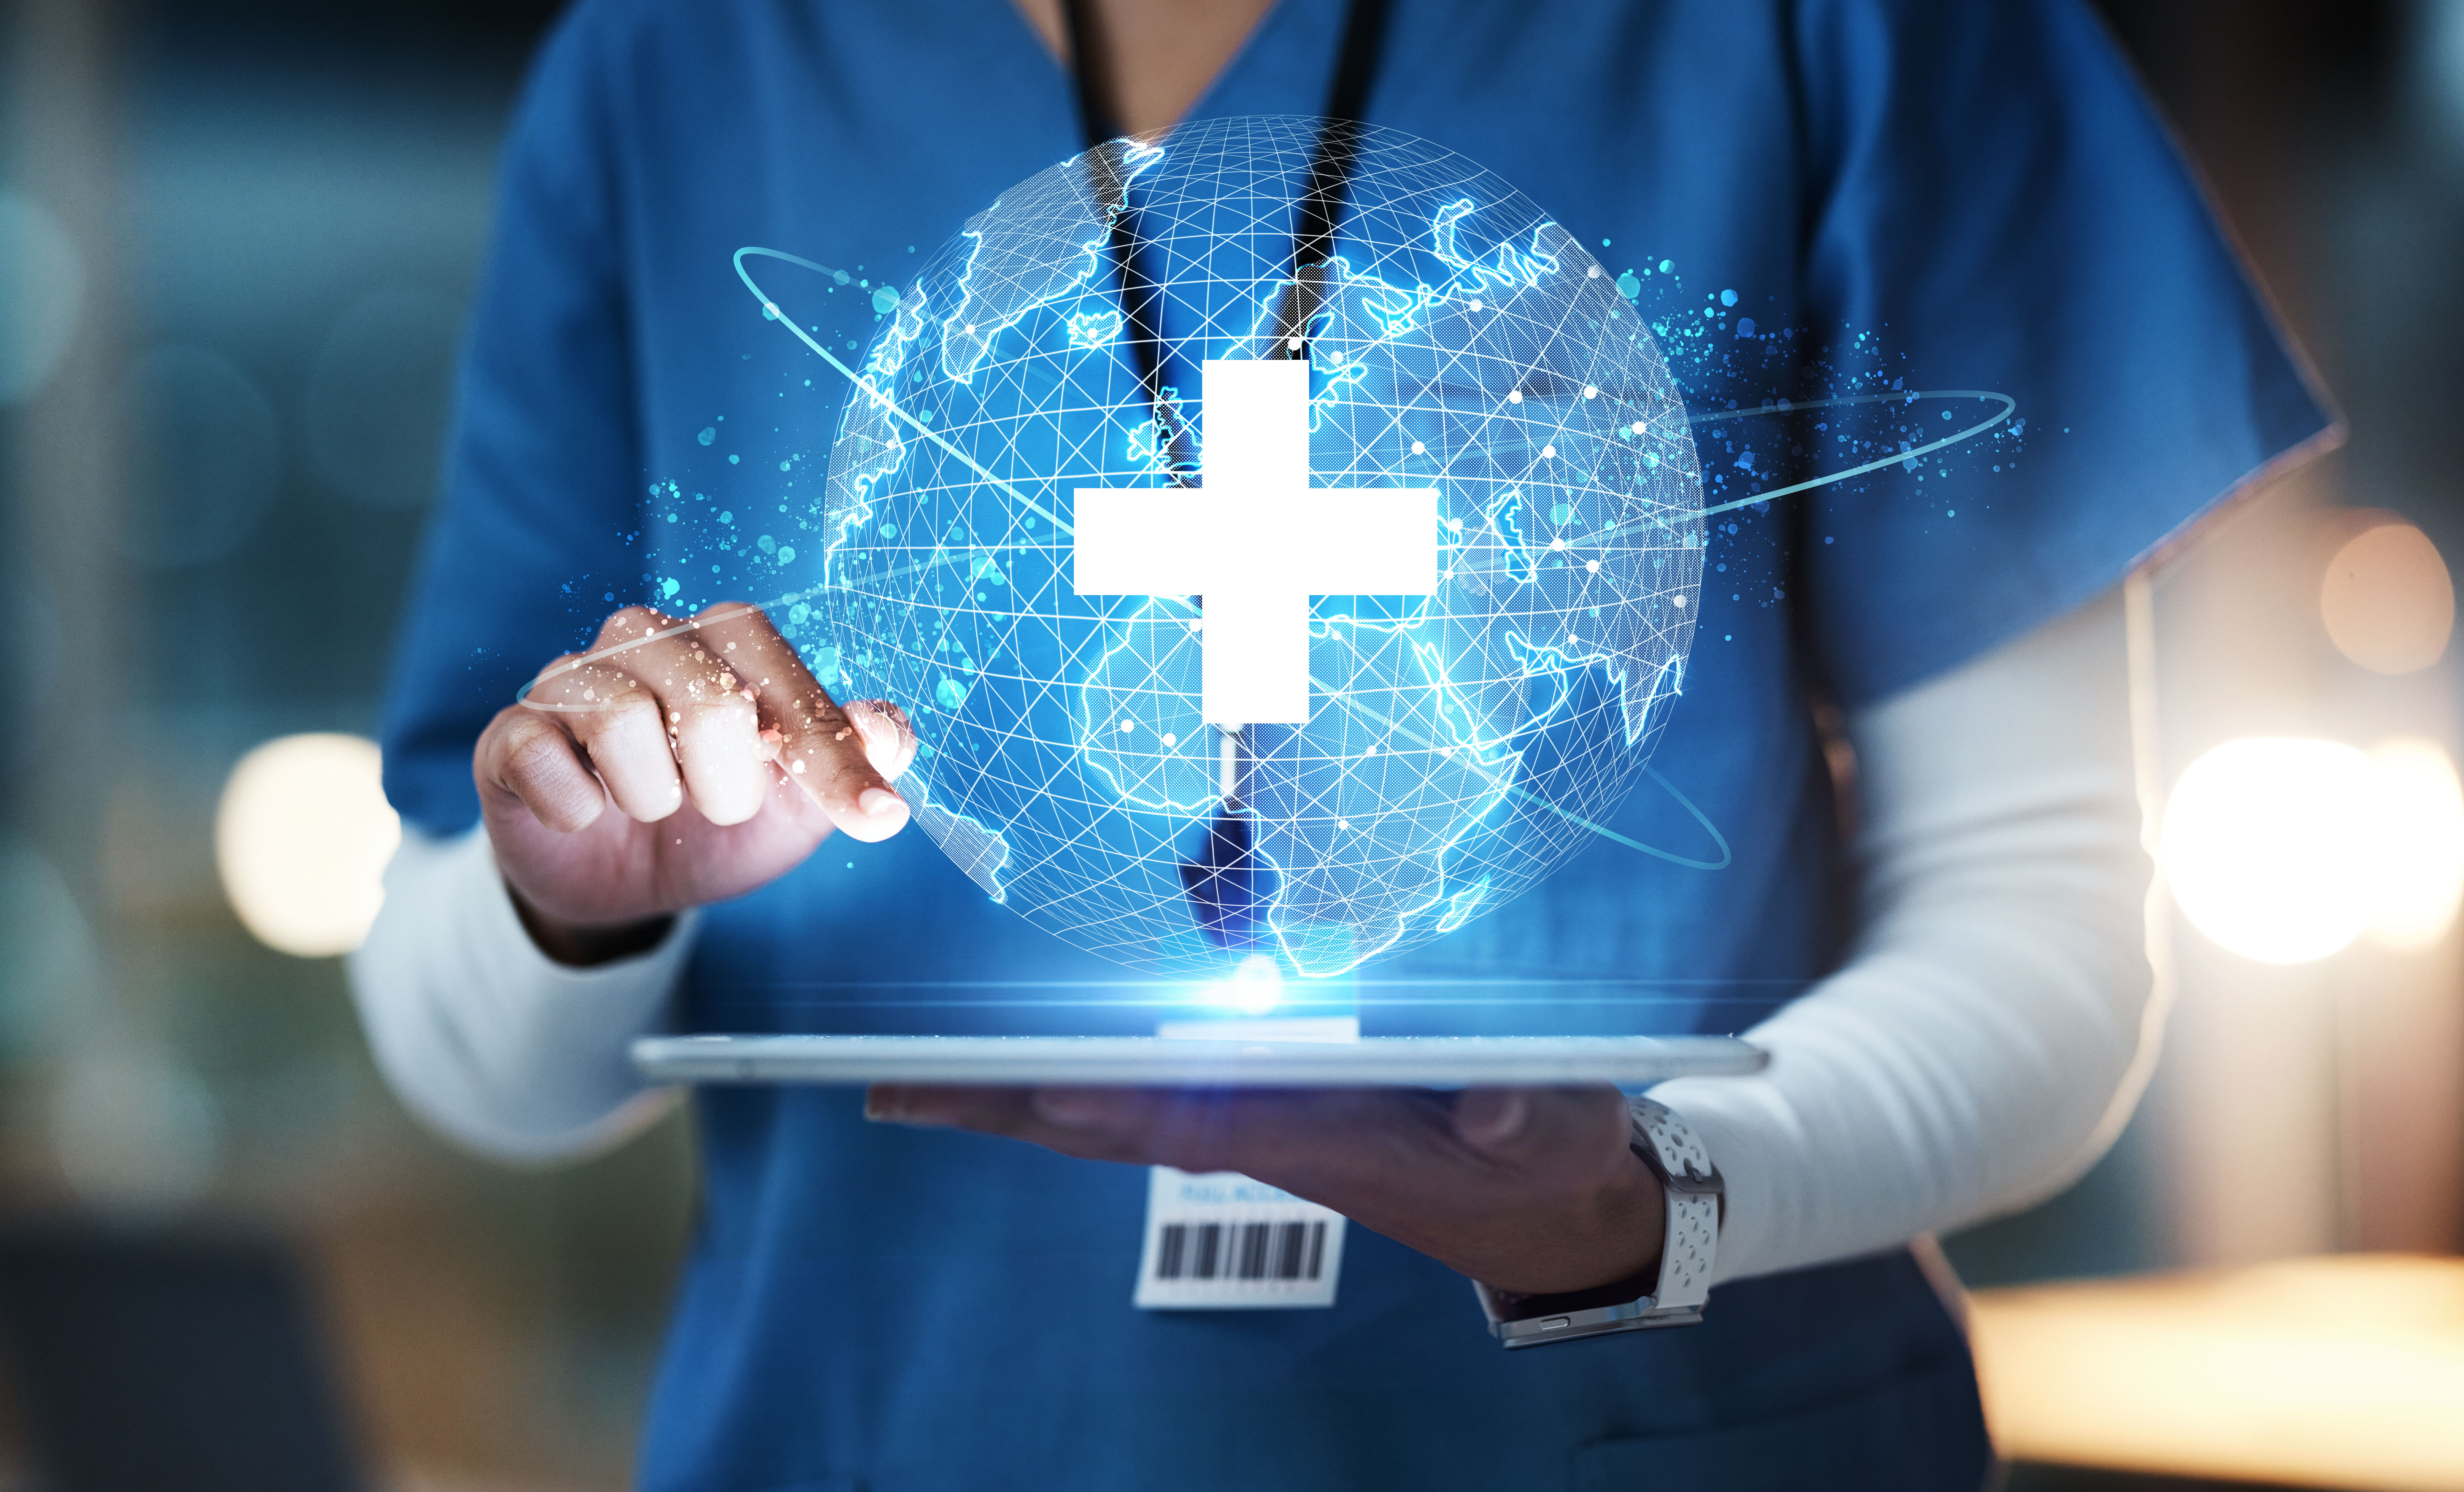 Nurse, hands or technology for 3d globe networking, healthcare community or digital help in life insurance support. Zoom, medical or futuristic world for global hospital, woman or doctor on tablet ux